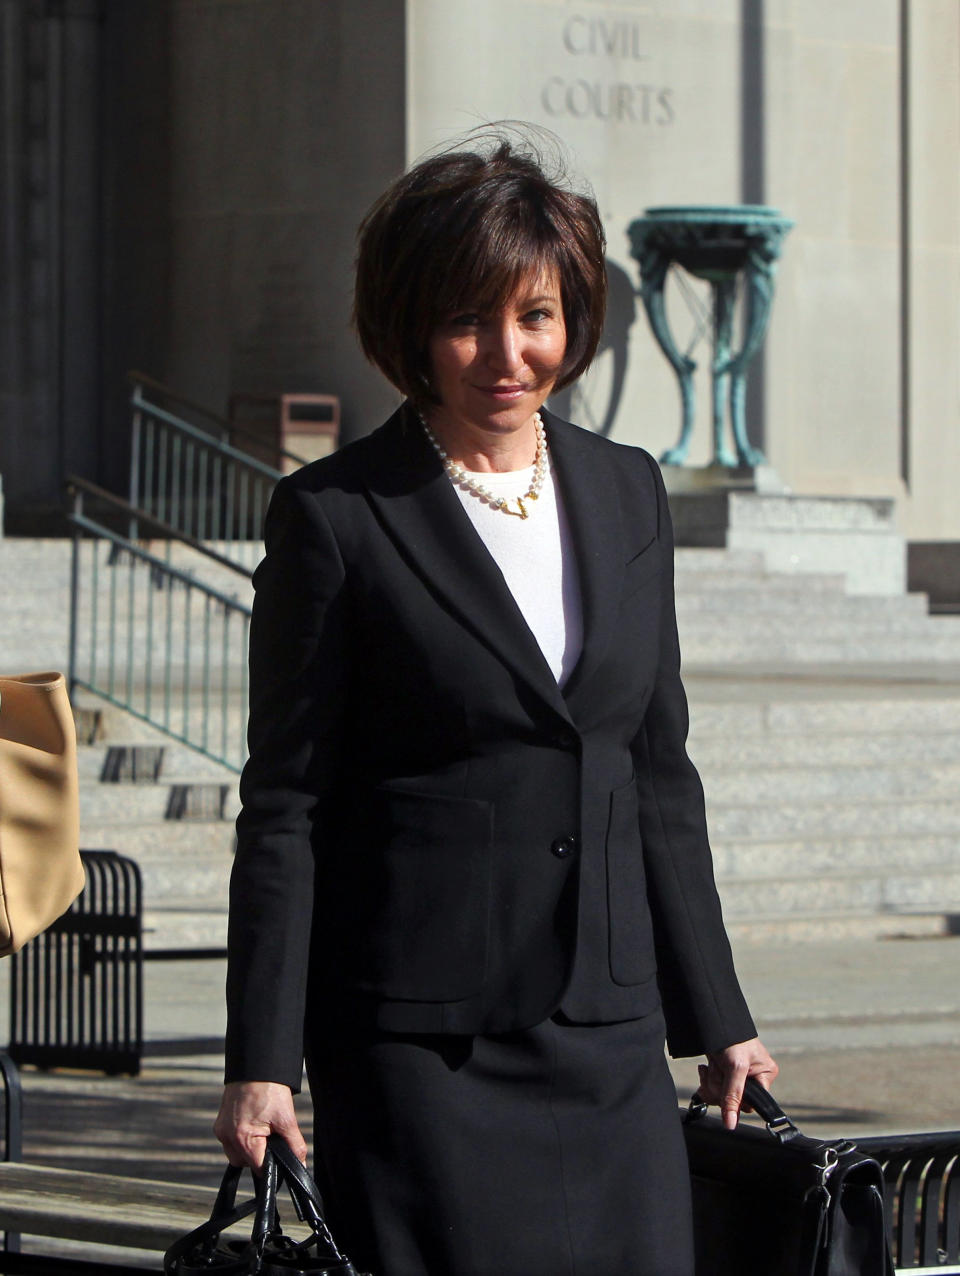 In this Wednesday, April 30, 2014 photo, Francine Katz leaves the Civil Court building in downtown St. Louis. Katz sued Anheuser-Busch in 2009, a year after resigning as vice president of communications and consumer affairs for the maker of Budweiser, Bud Light and other beers. The trail began Monday with jury selection. (AP Photo/St. Louis Post-Dispatch, Christian Gooden) EDWARDSVILLE INTELLIGENCER OUT; THE ALTON TELEGRAPH OUT